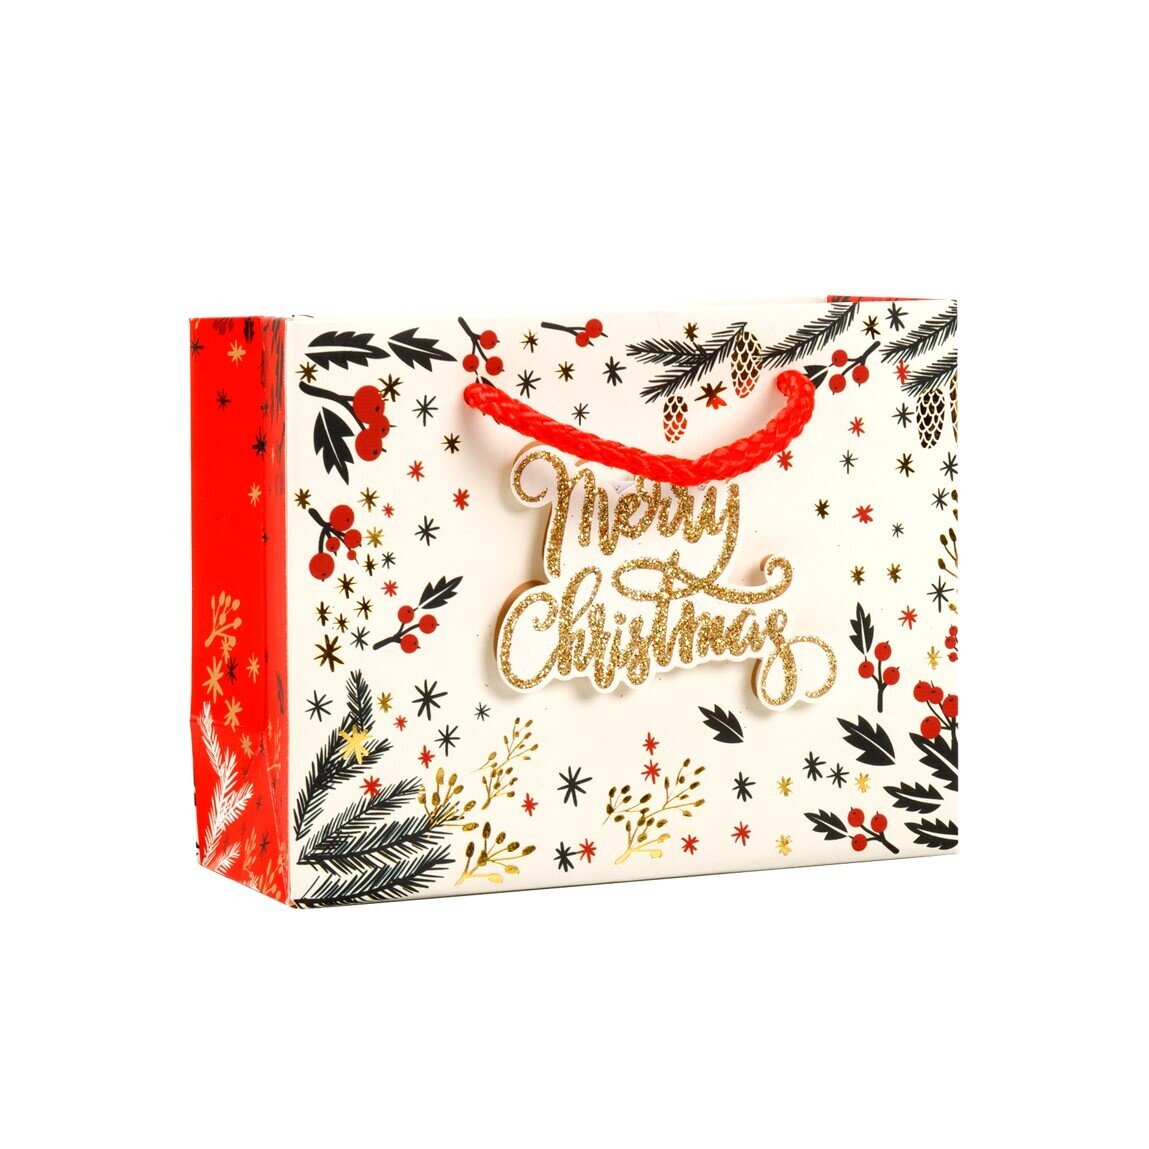 XMAS GIFT BAG 140X110X65MM MODERN FOIL AND GLITTER SMALL